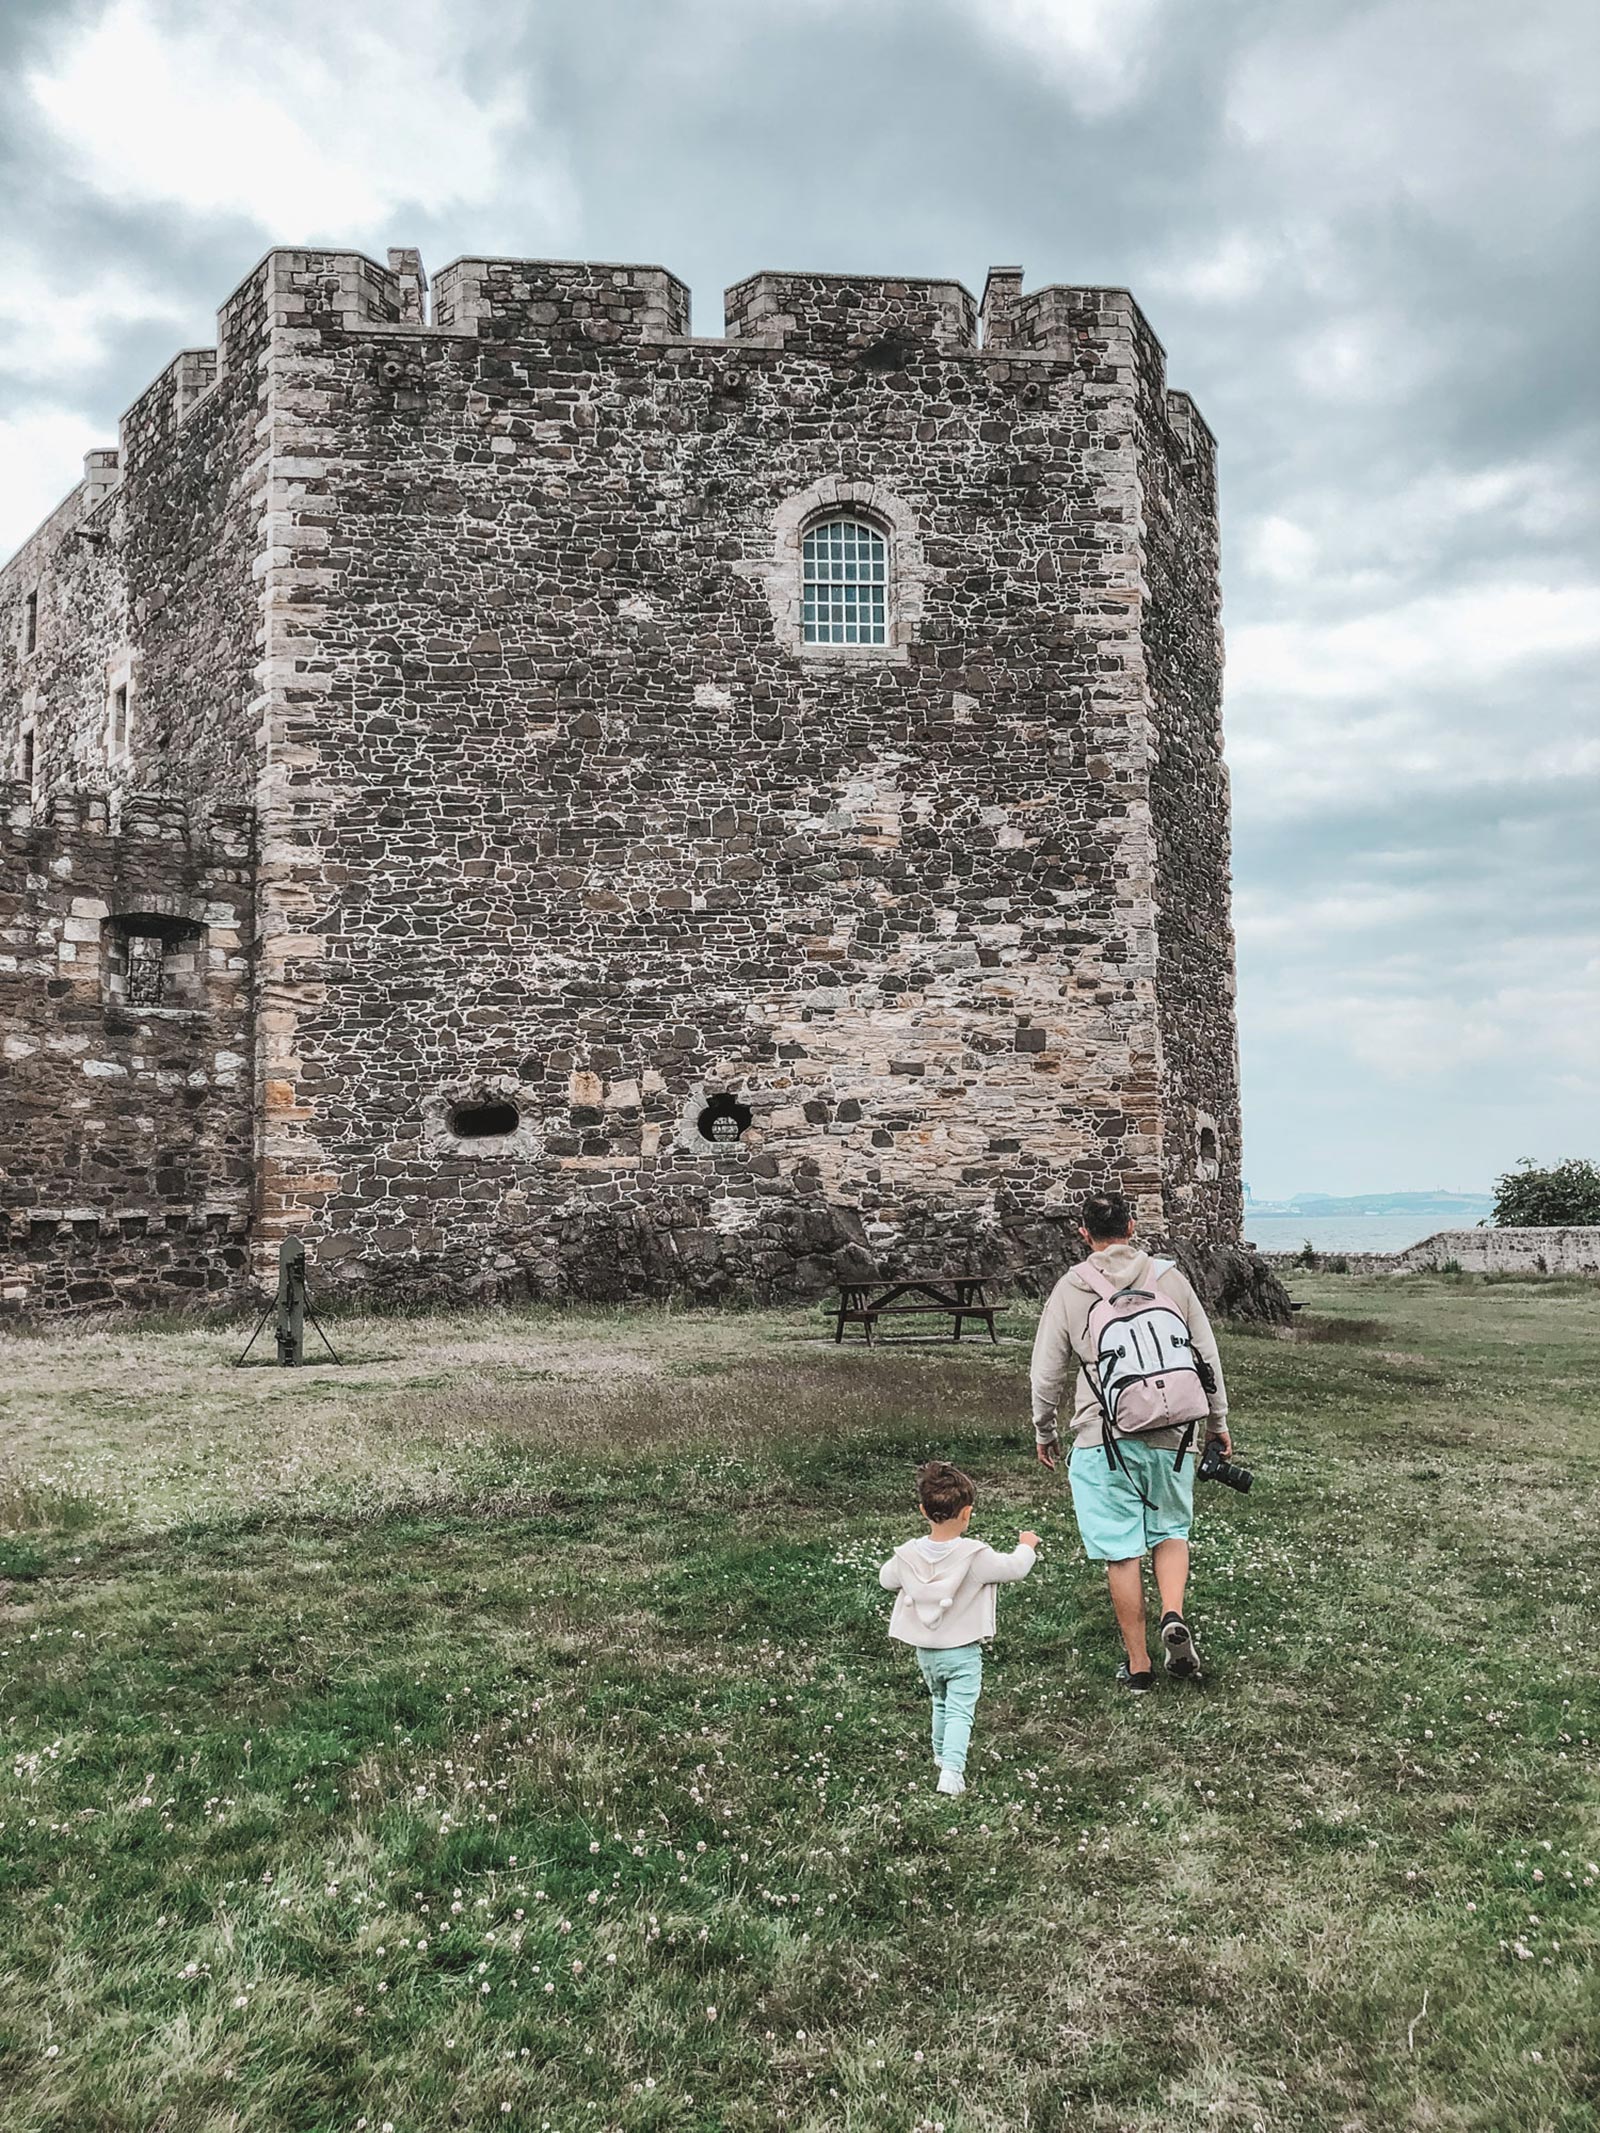 Max and Terry at Blackness Castle